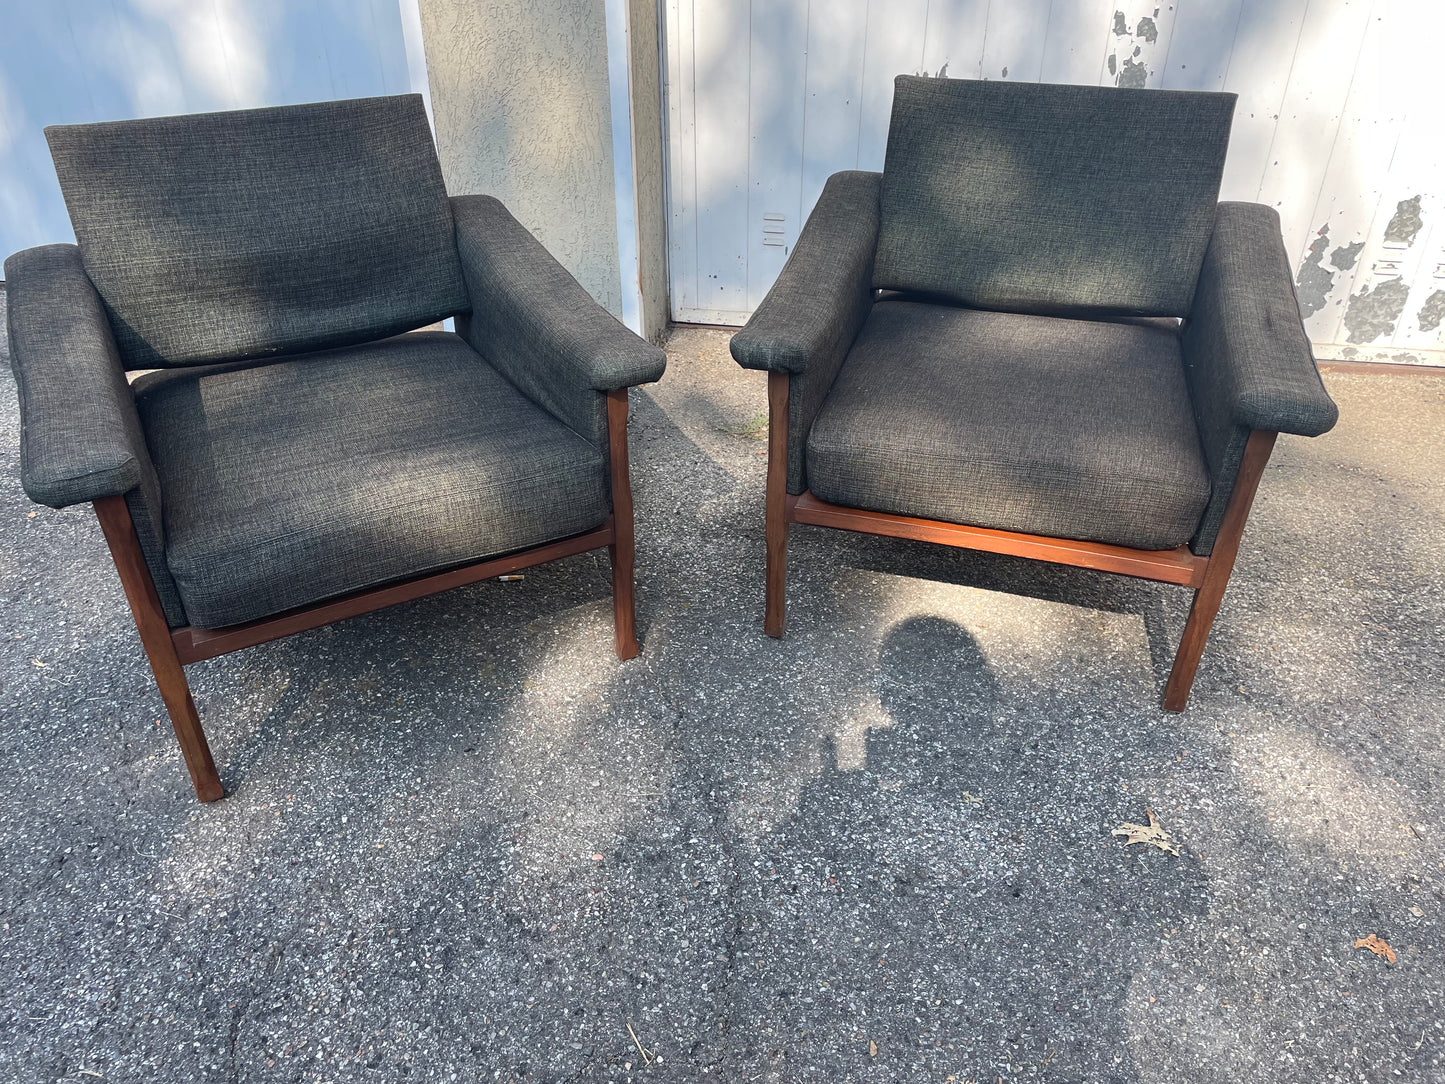 Pair of Minotti Renzo armchairs from the 70s design